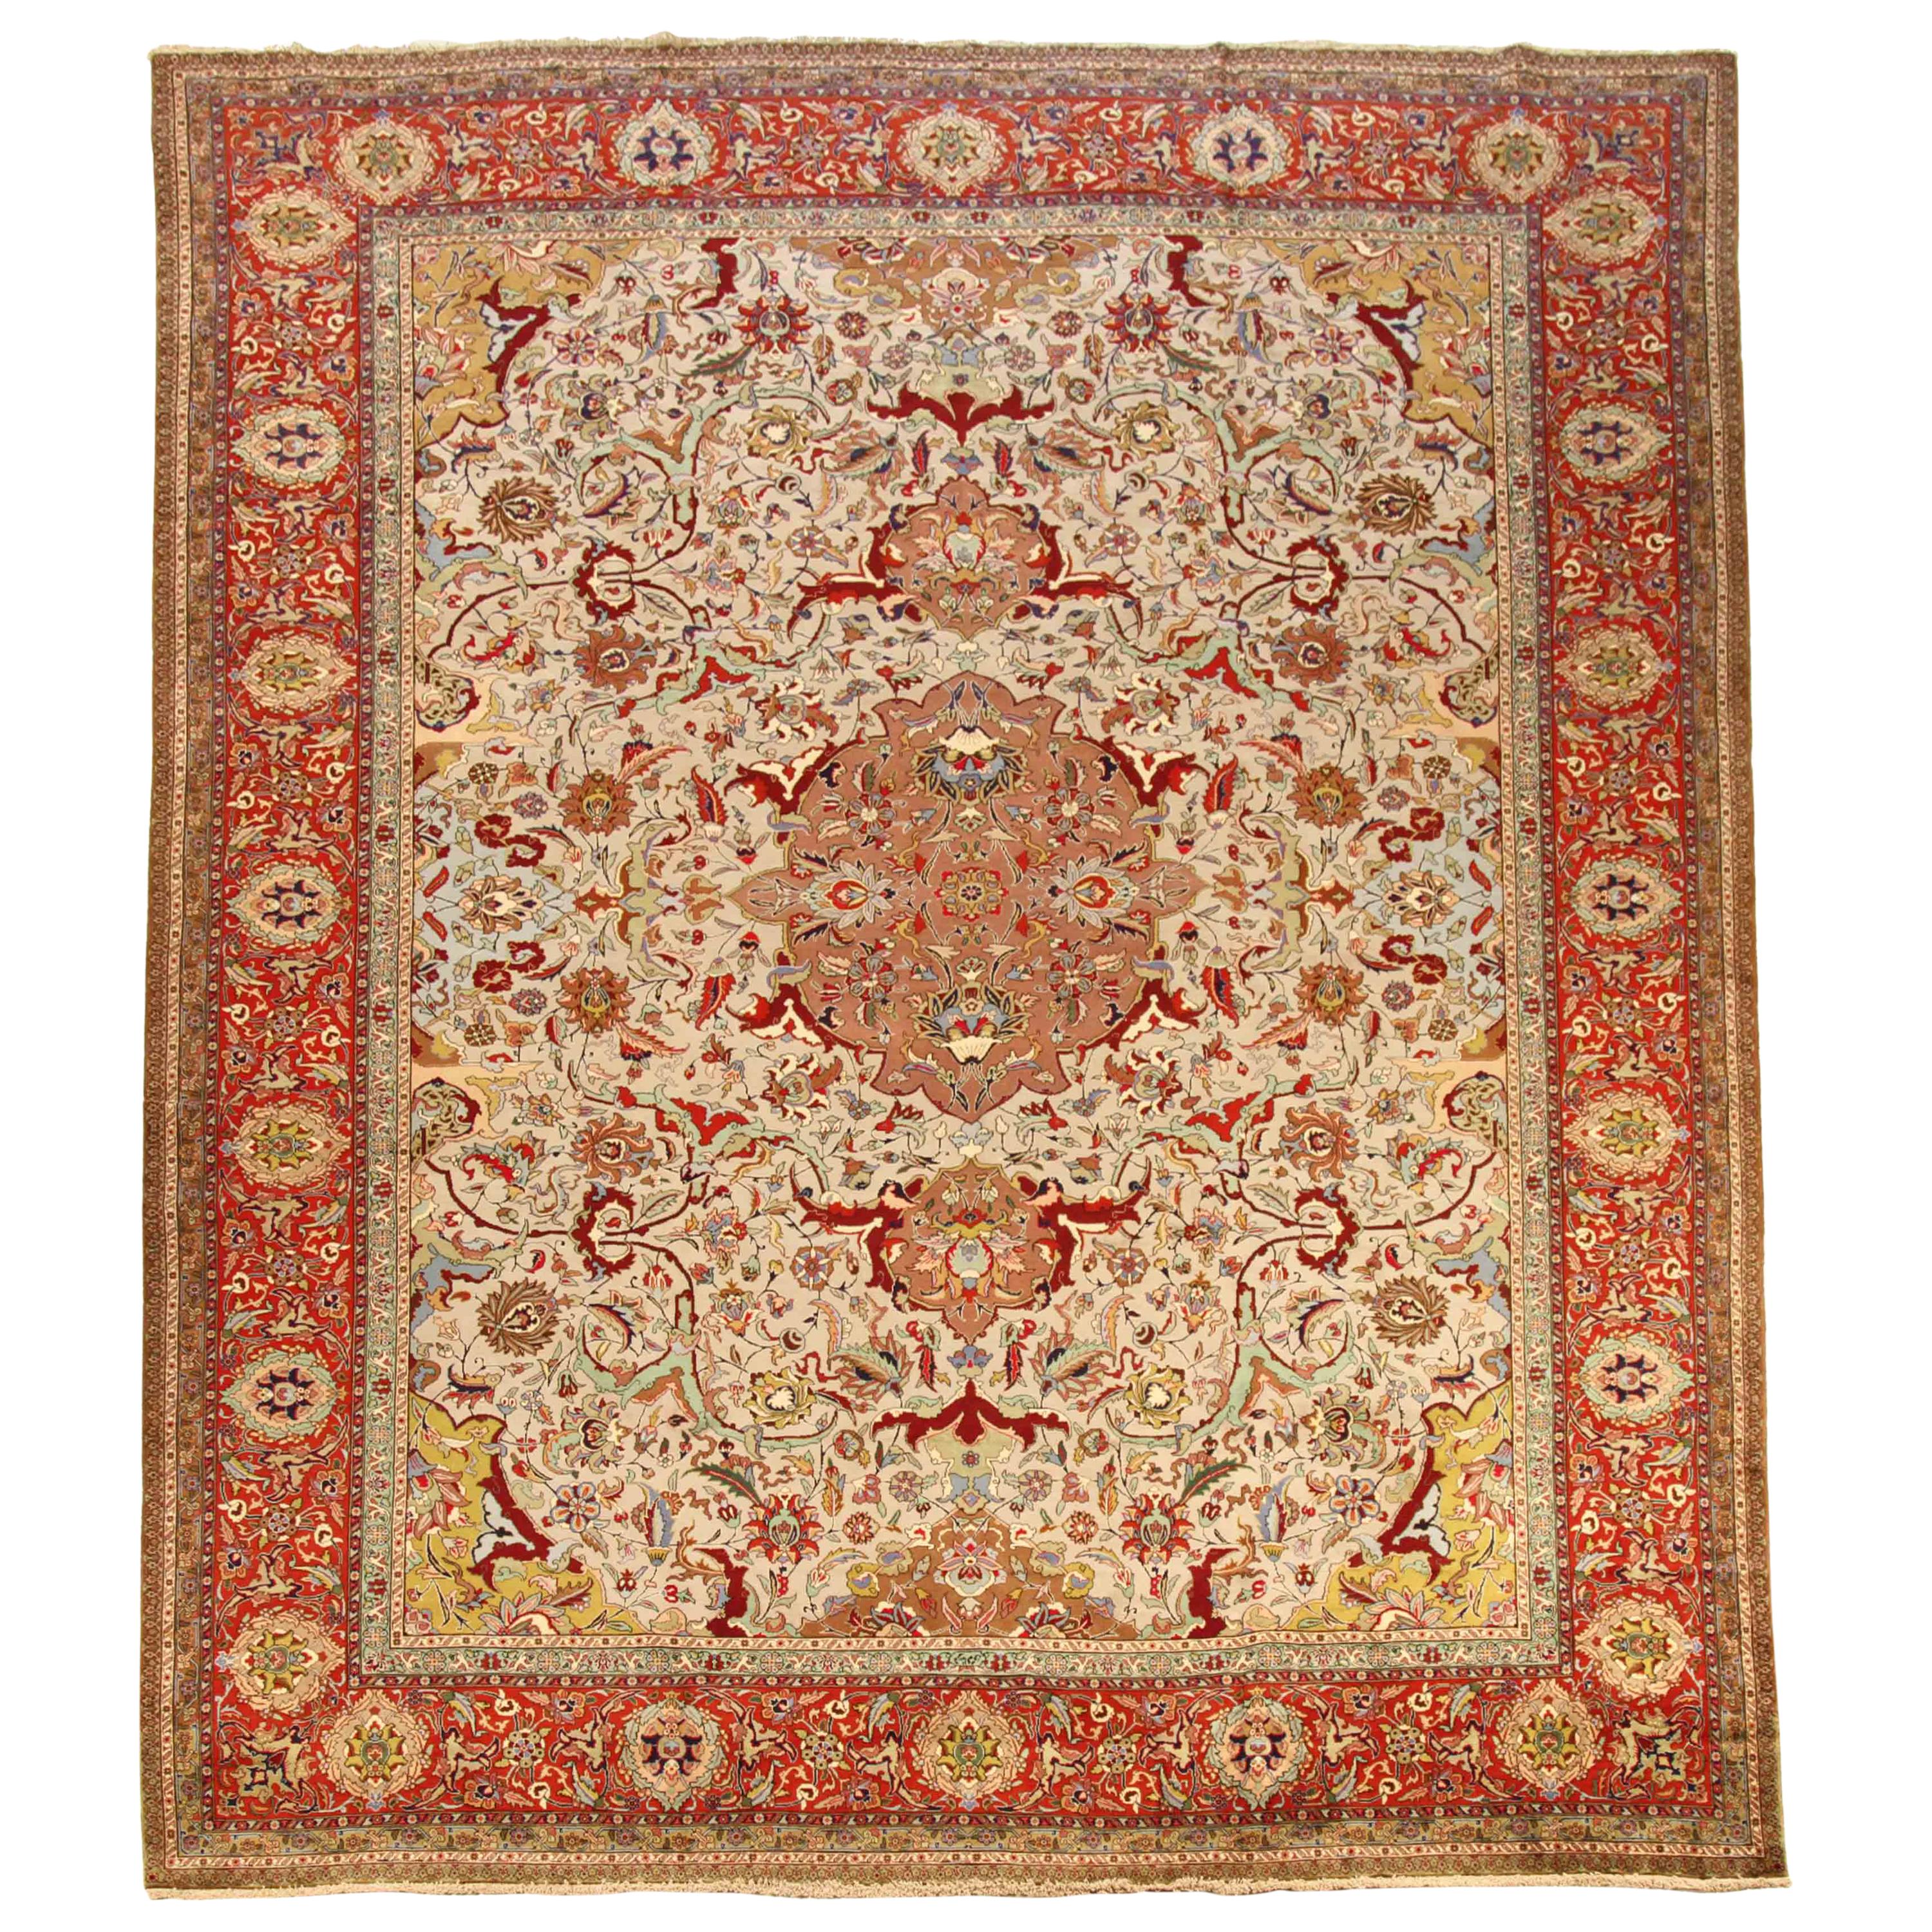 Antique Persian Tabriz Rug with Ivory and Red Floral Patterns, circa 1960s